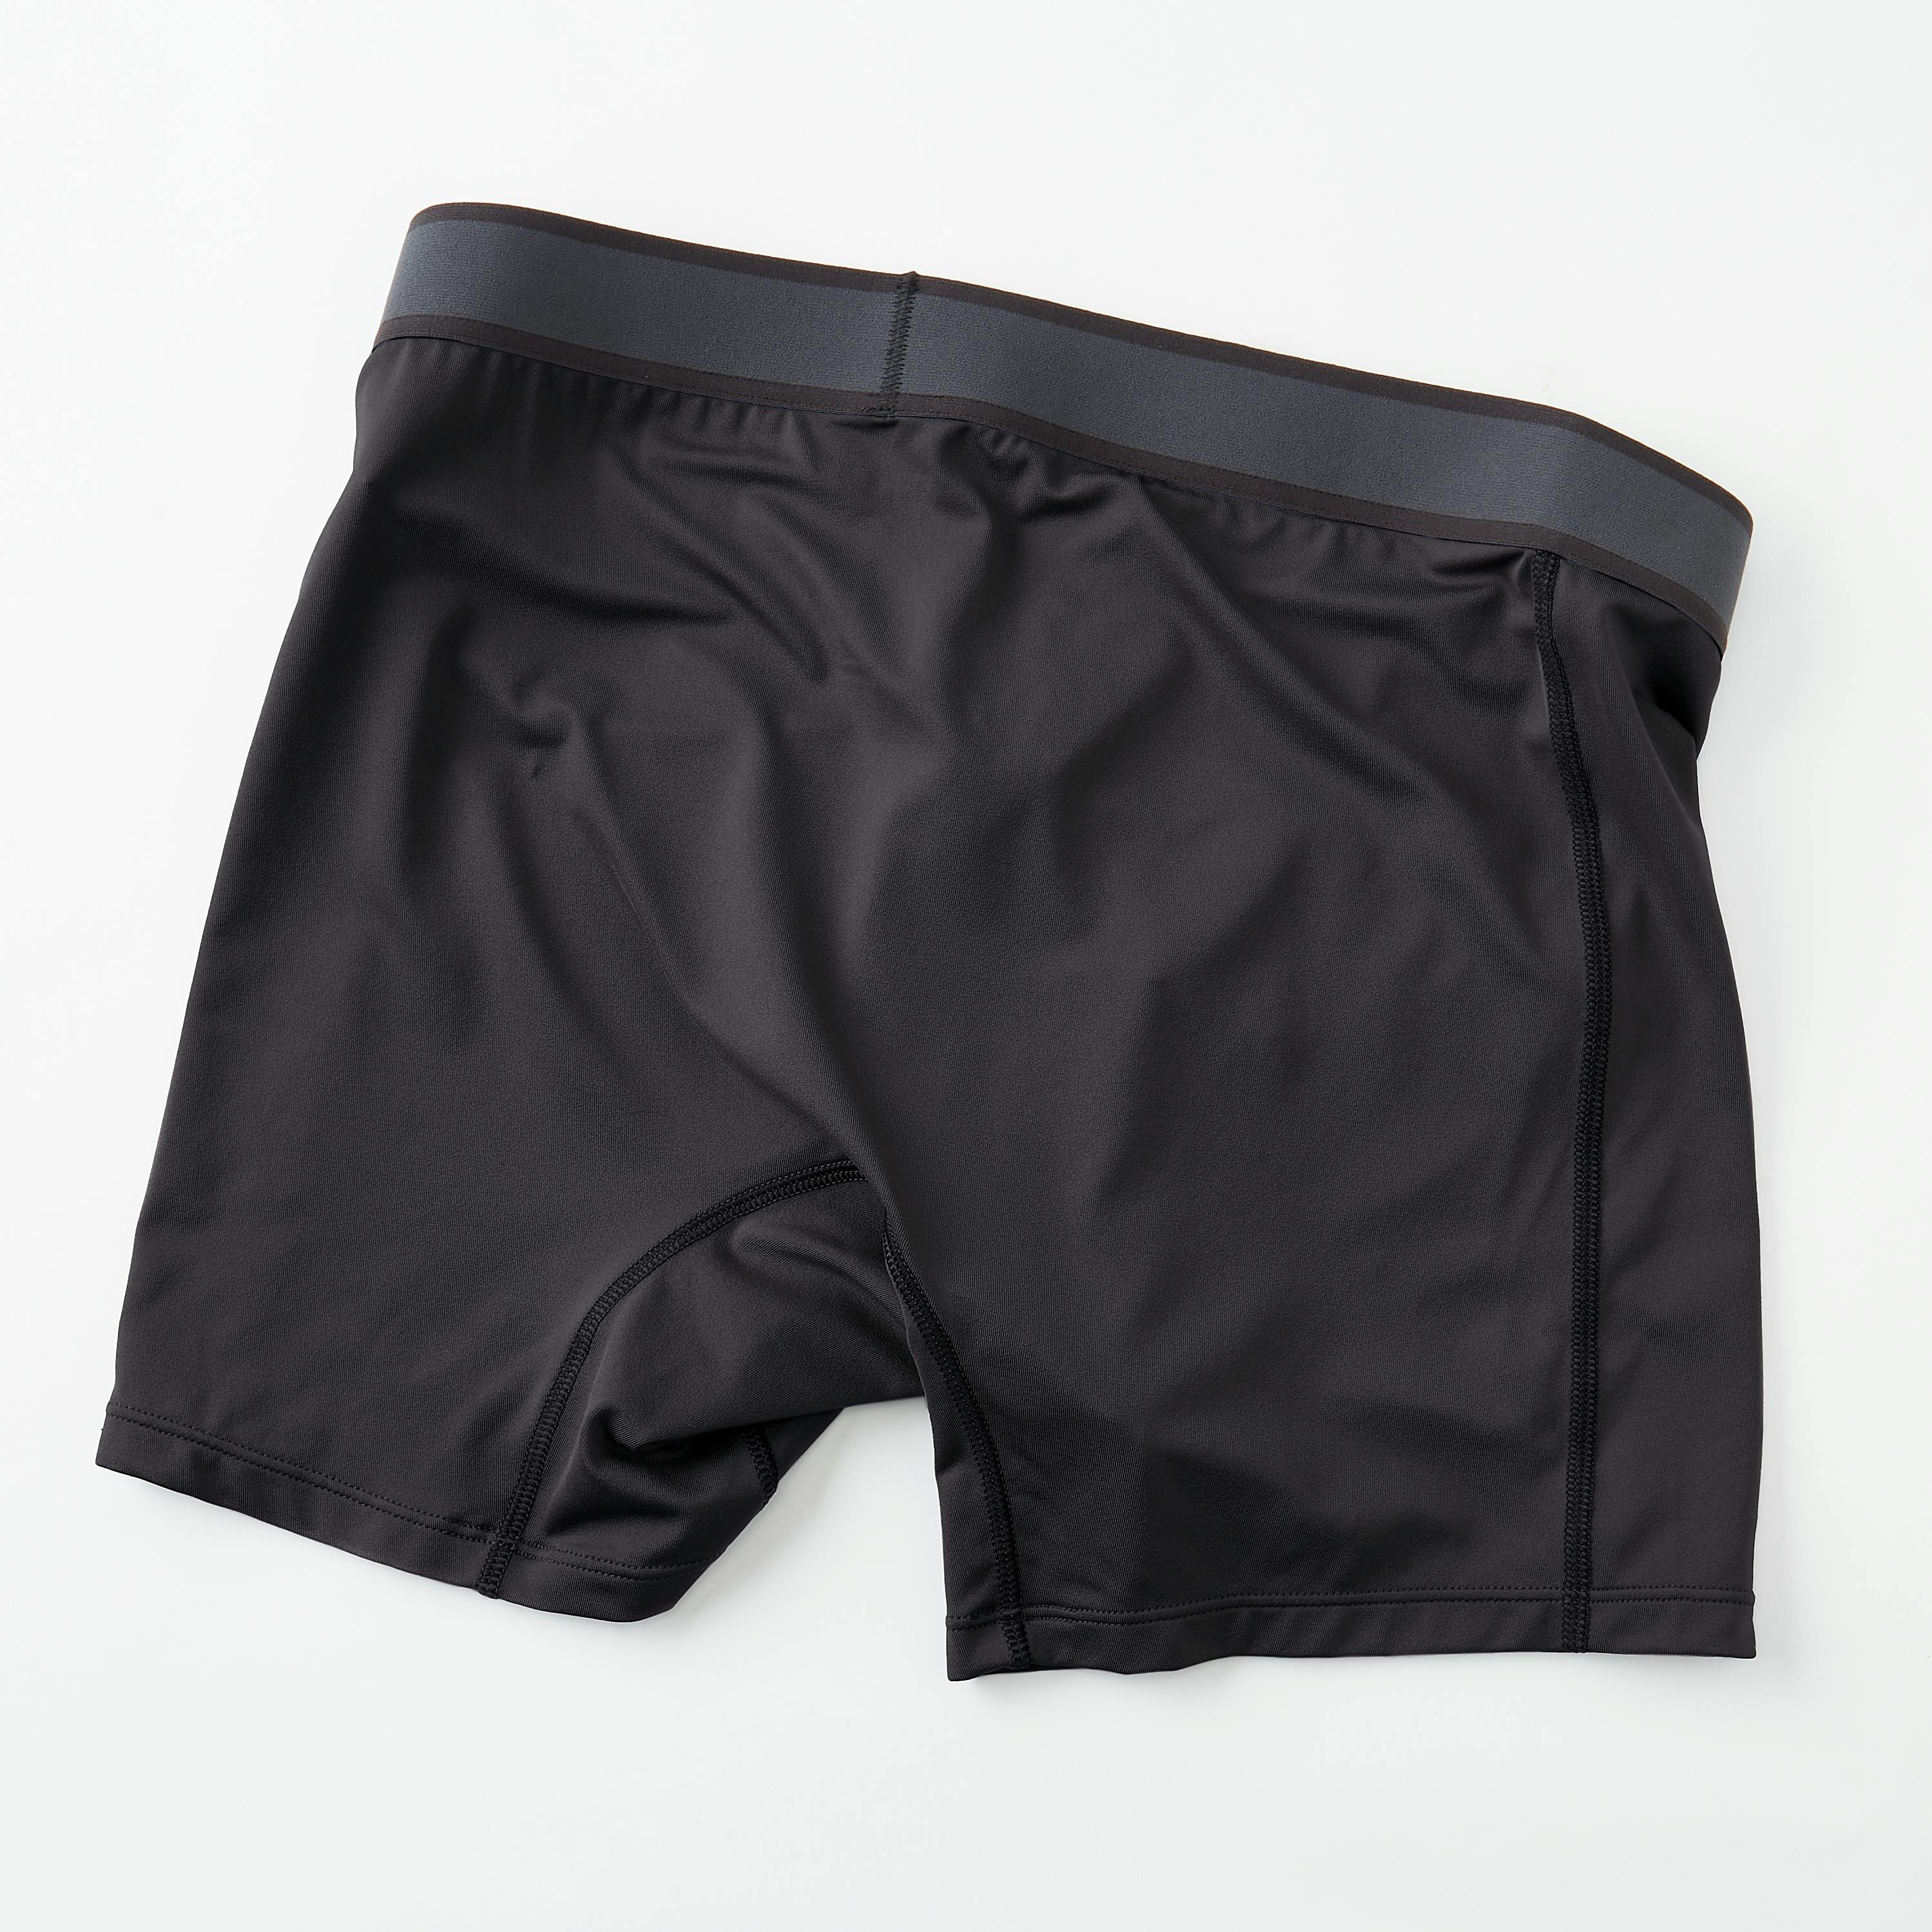 Marled 6.5 Performance Knit Boxer Briefs